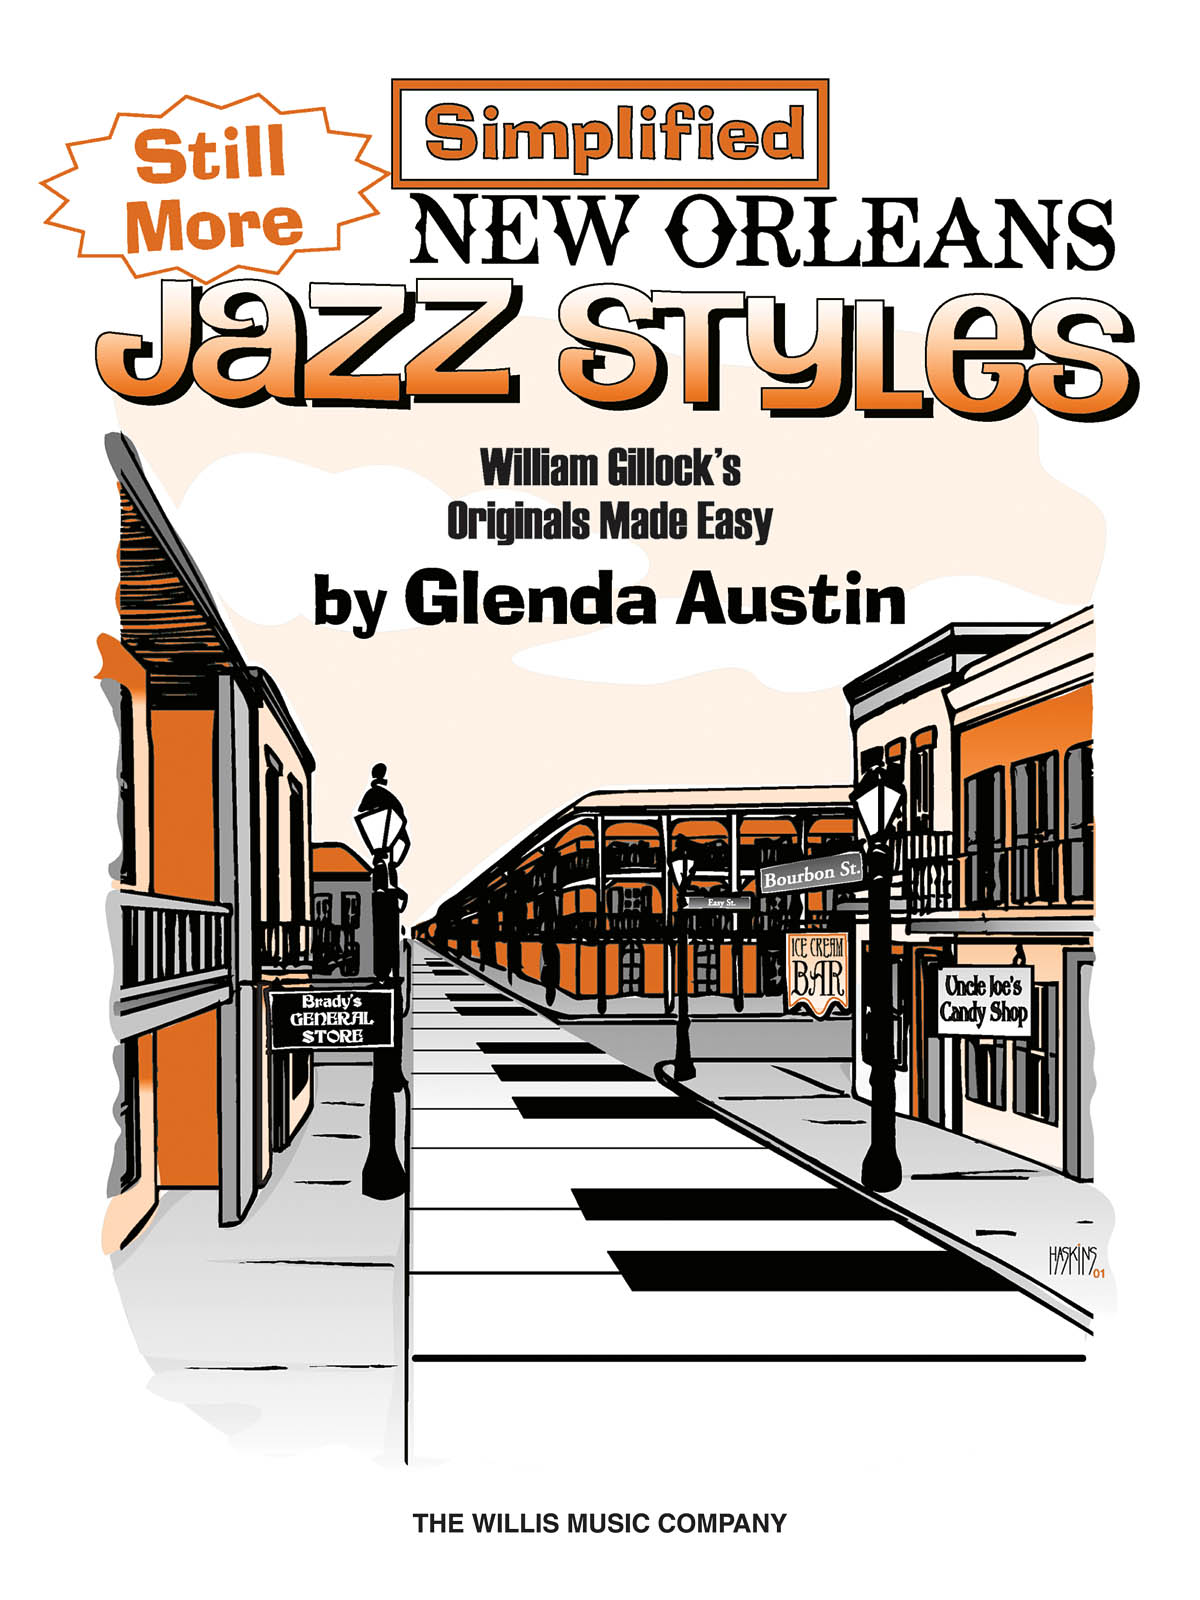 William Gillock: Still More Simplified New Orleans Jazz Styles: Piano: Mixed